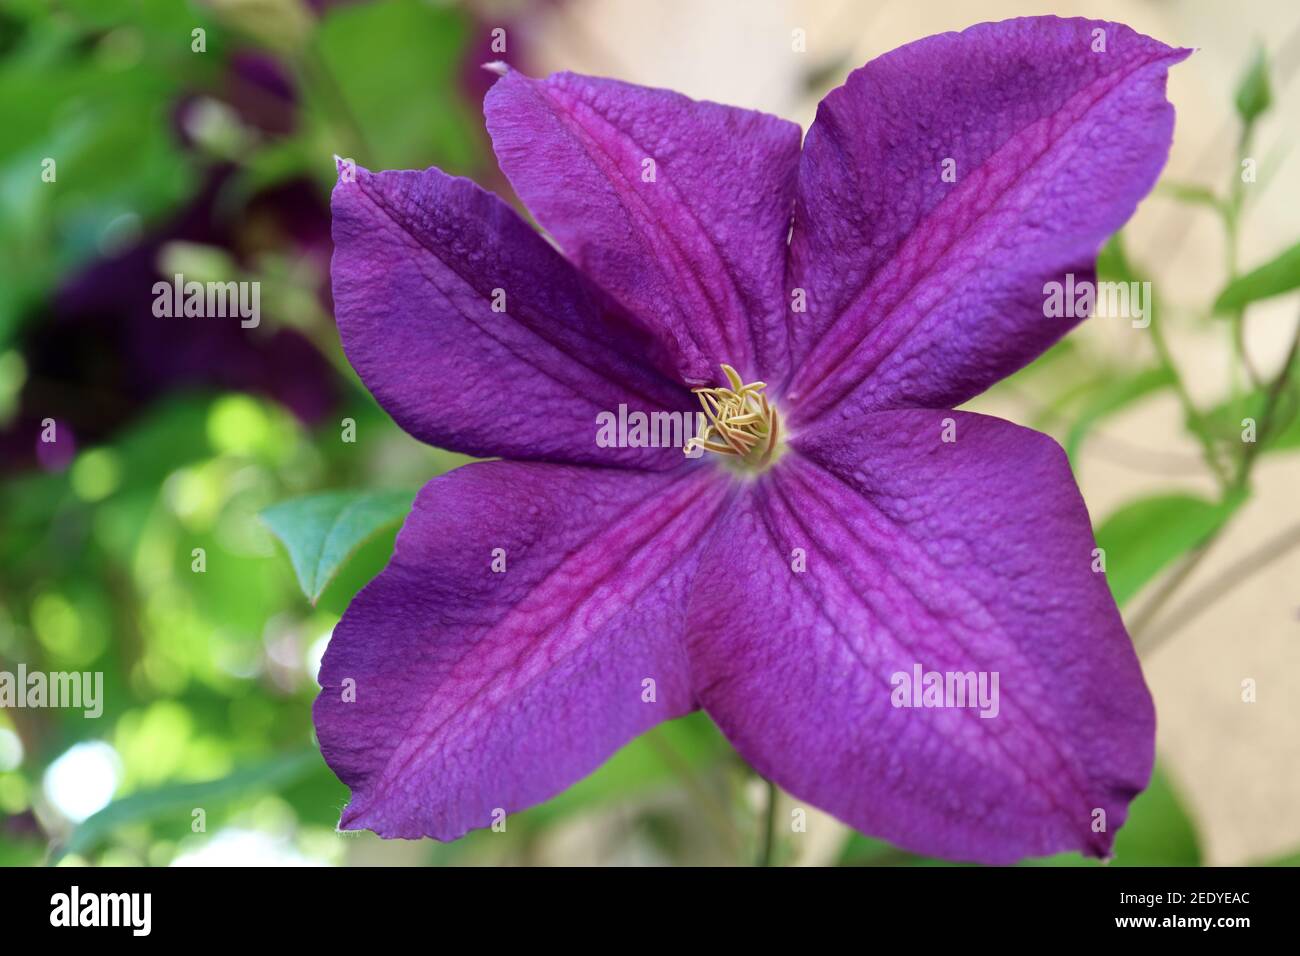 Purple Clematis with green leaves in the garden, clematis flower head macro , Beauty in nature, floral photo, macro photography, stock image Stock Photo